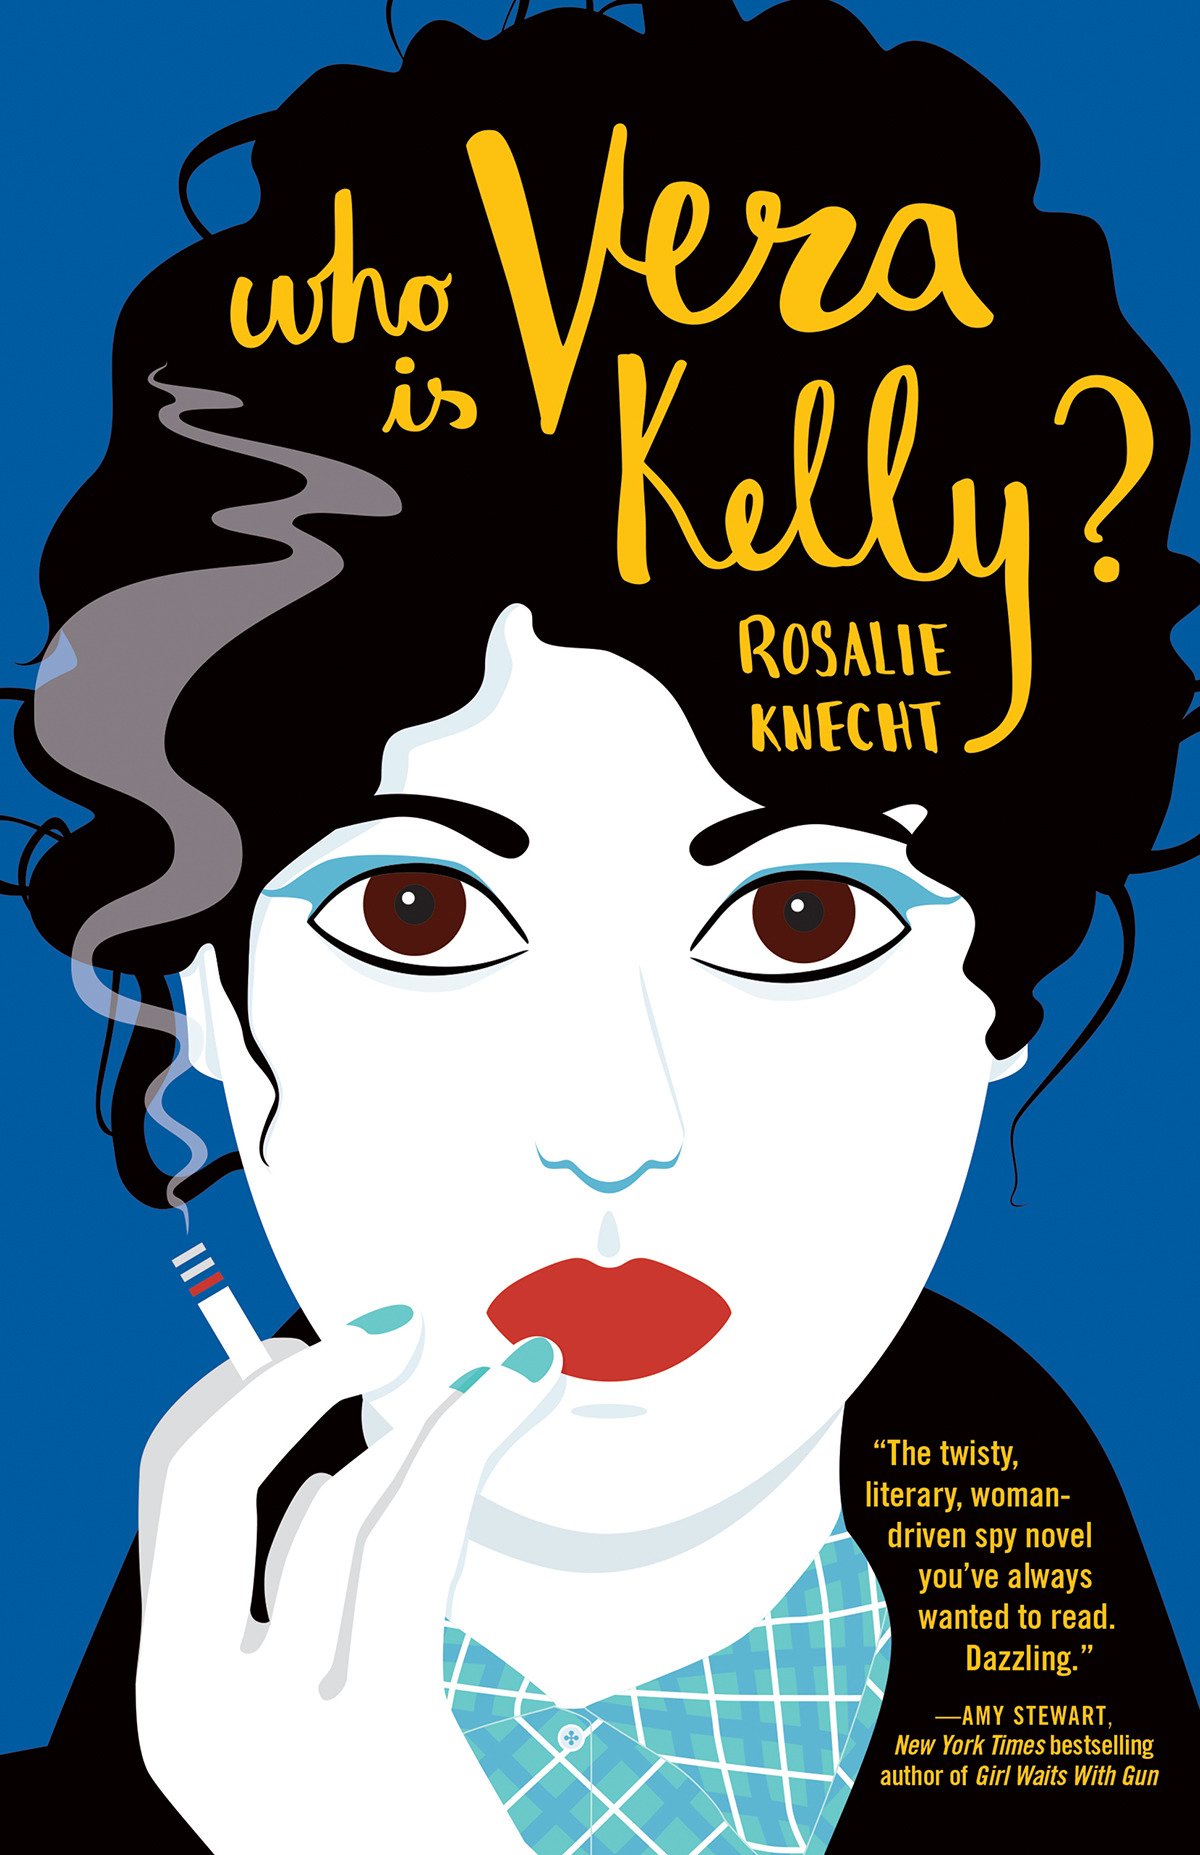 A book cover for Who Is Vera Kelly